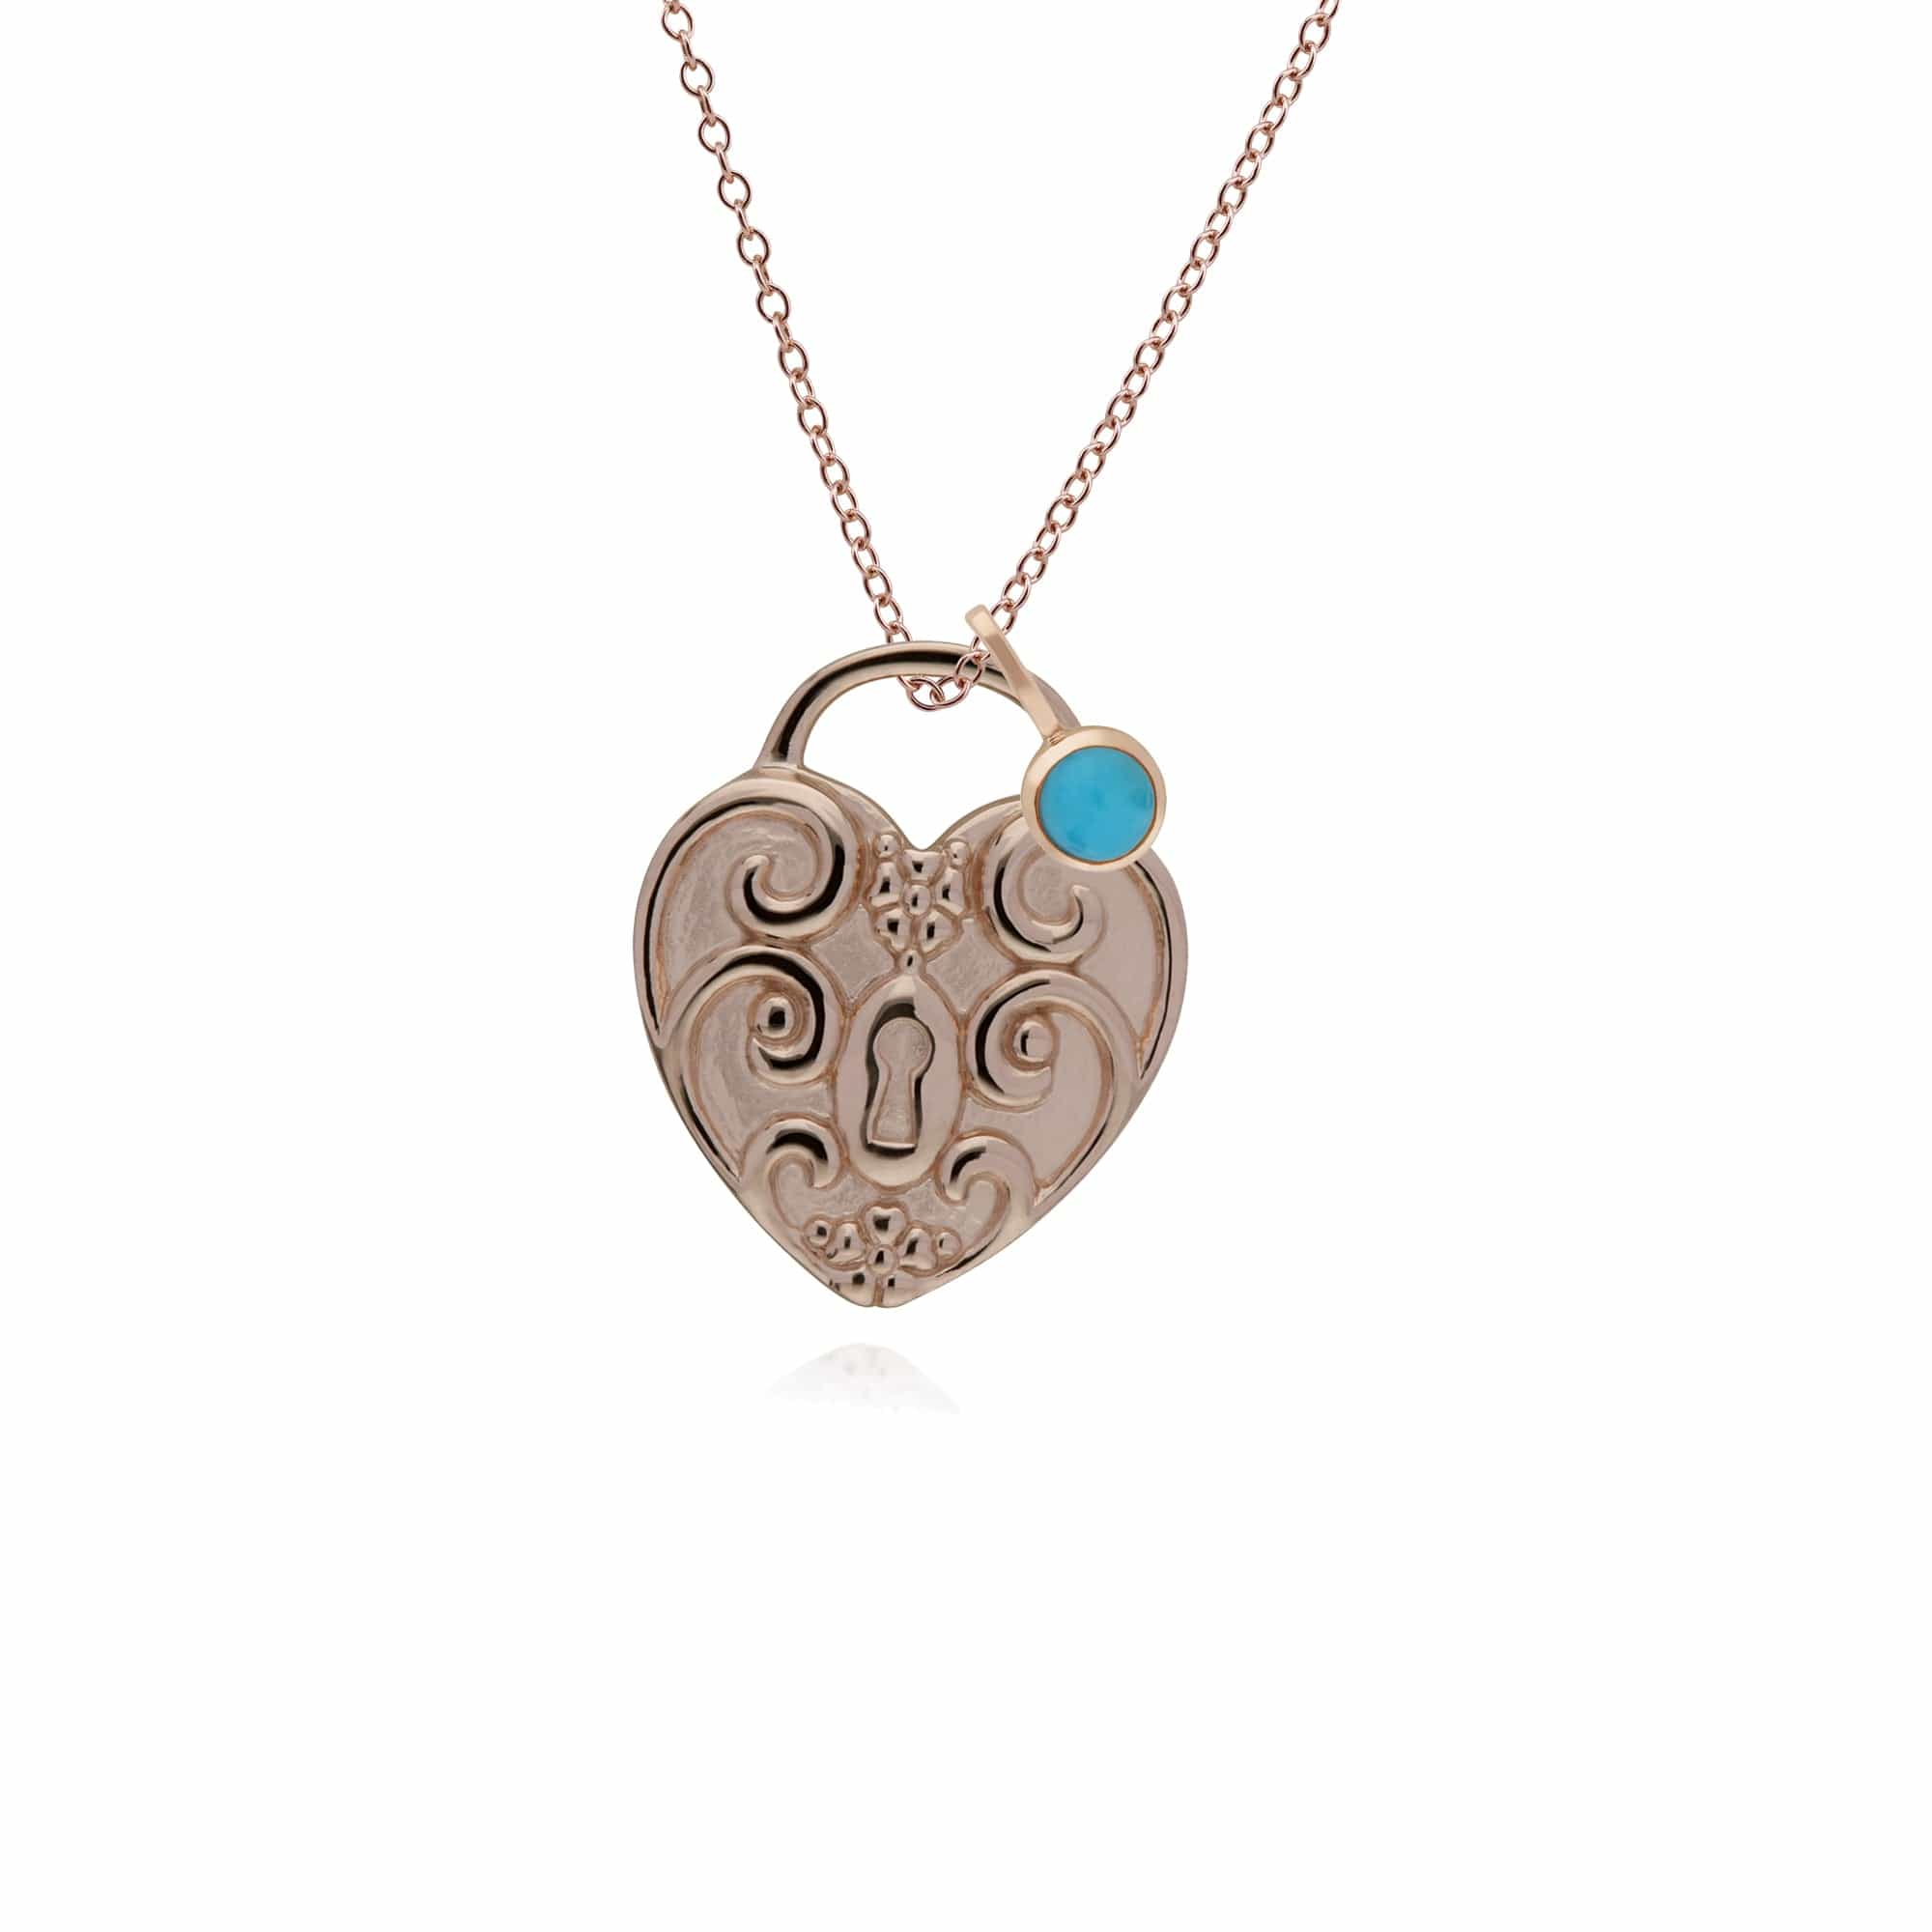 270P028501925-270P026501925 Classic Swirl Heart Lock Pendant & Turquoise Charm in Rose Gold Plated 925 Sterling Silver 1